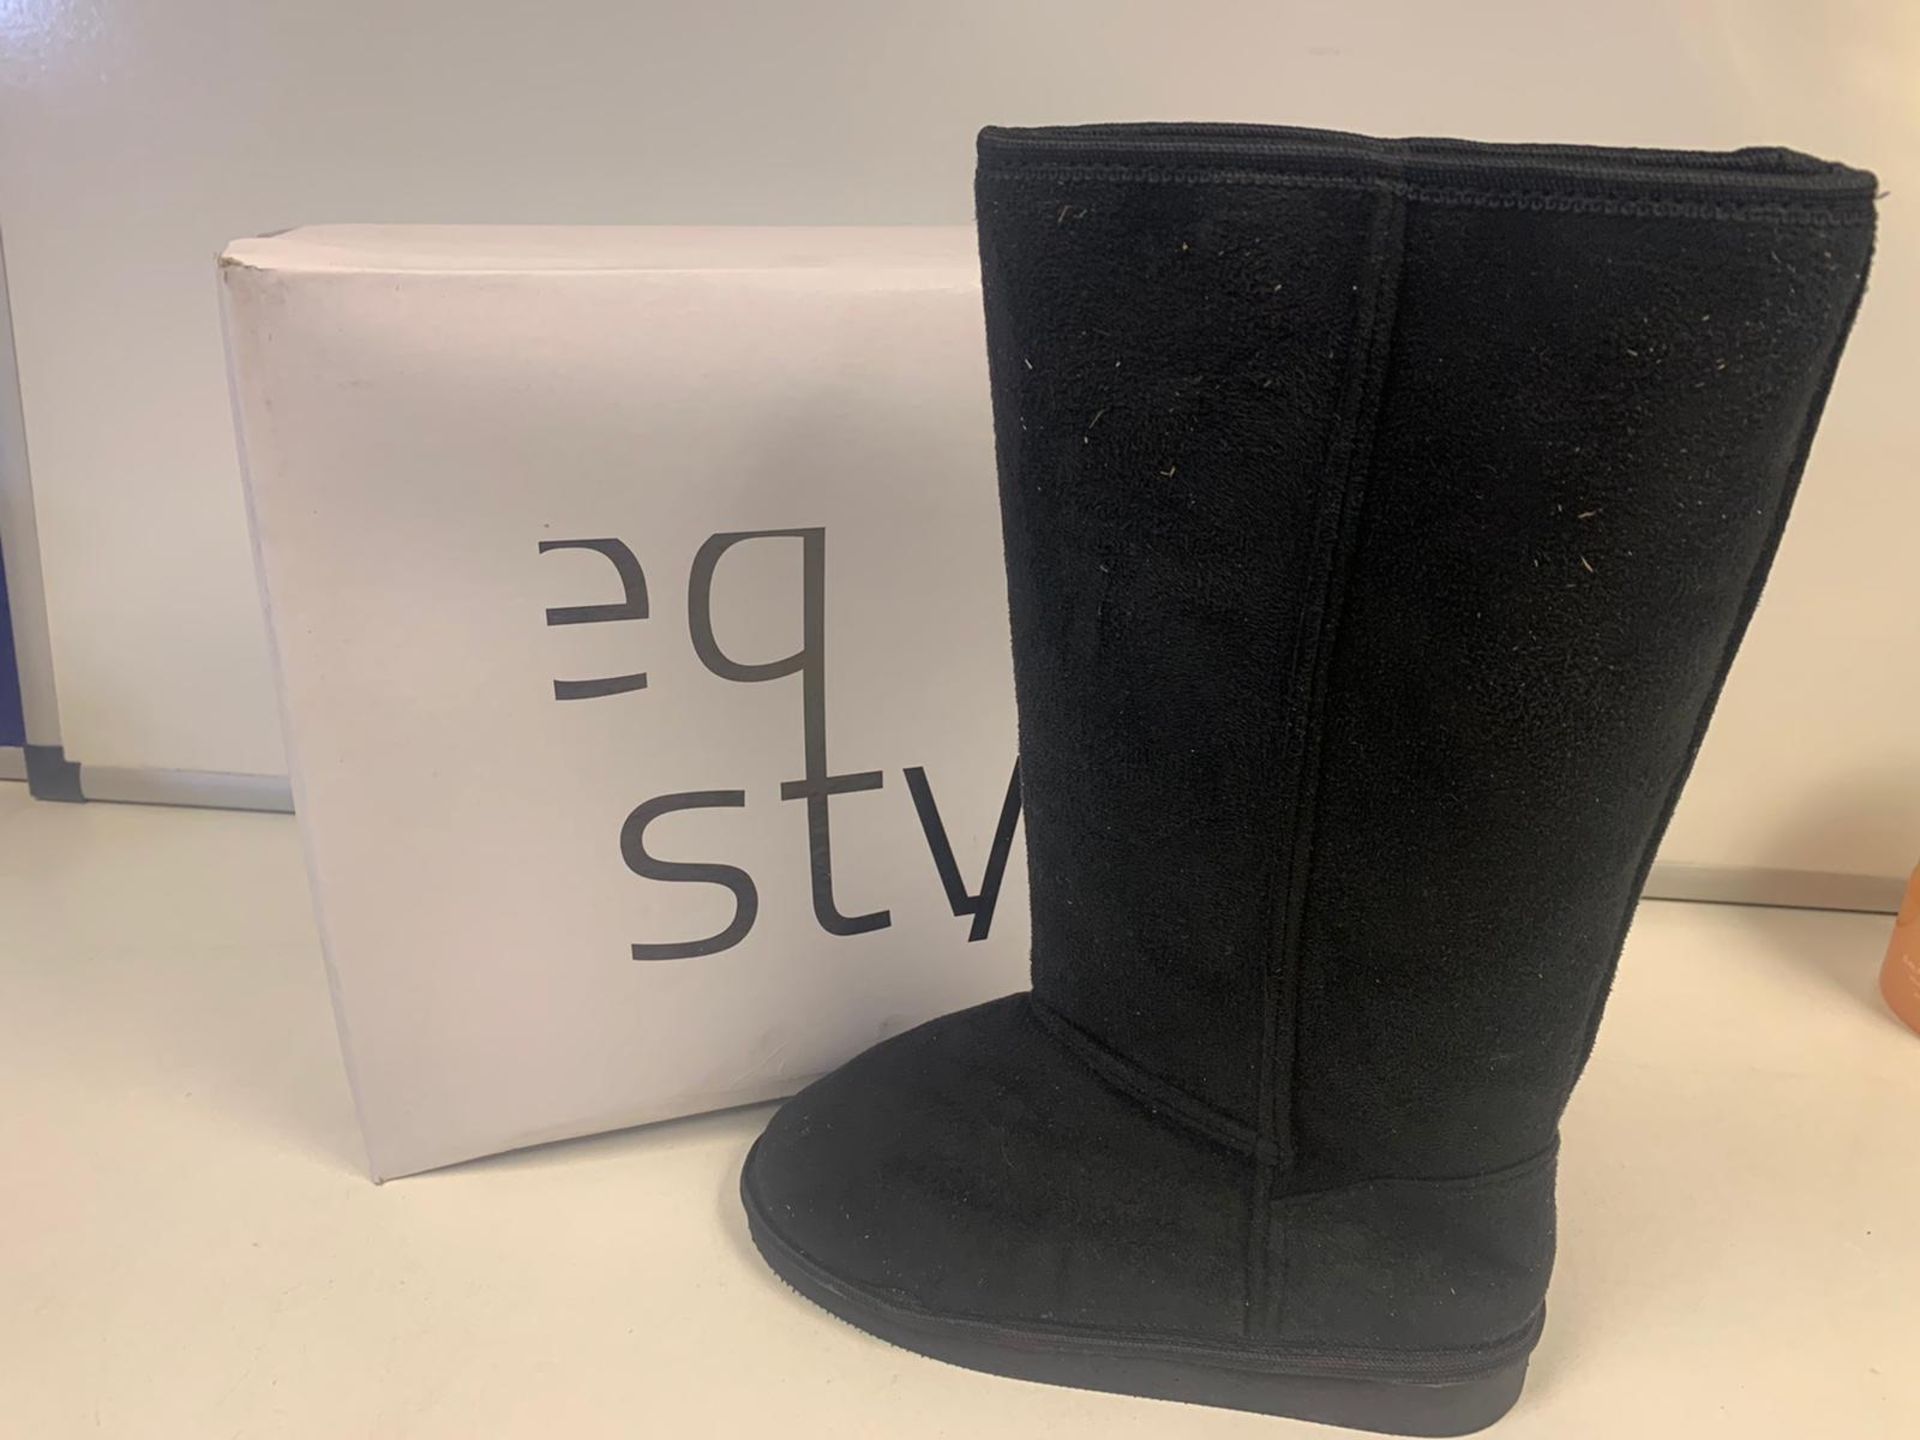 20 X BRAND NEW BOXED EQ STYLE WINTER BOOTS BLACK SIZE 4 IN 2 BOXES